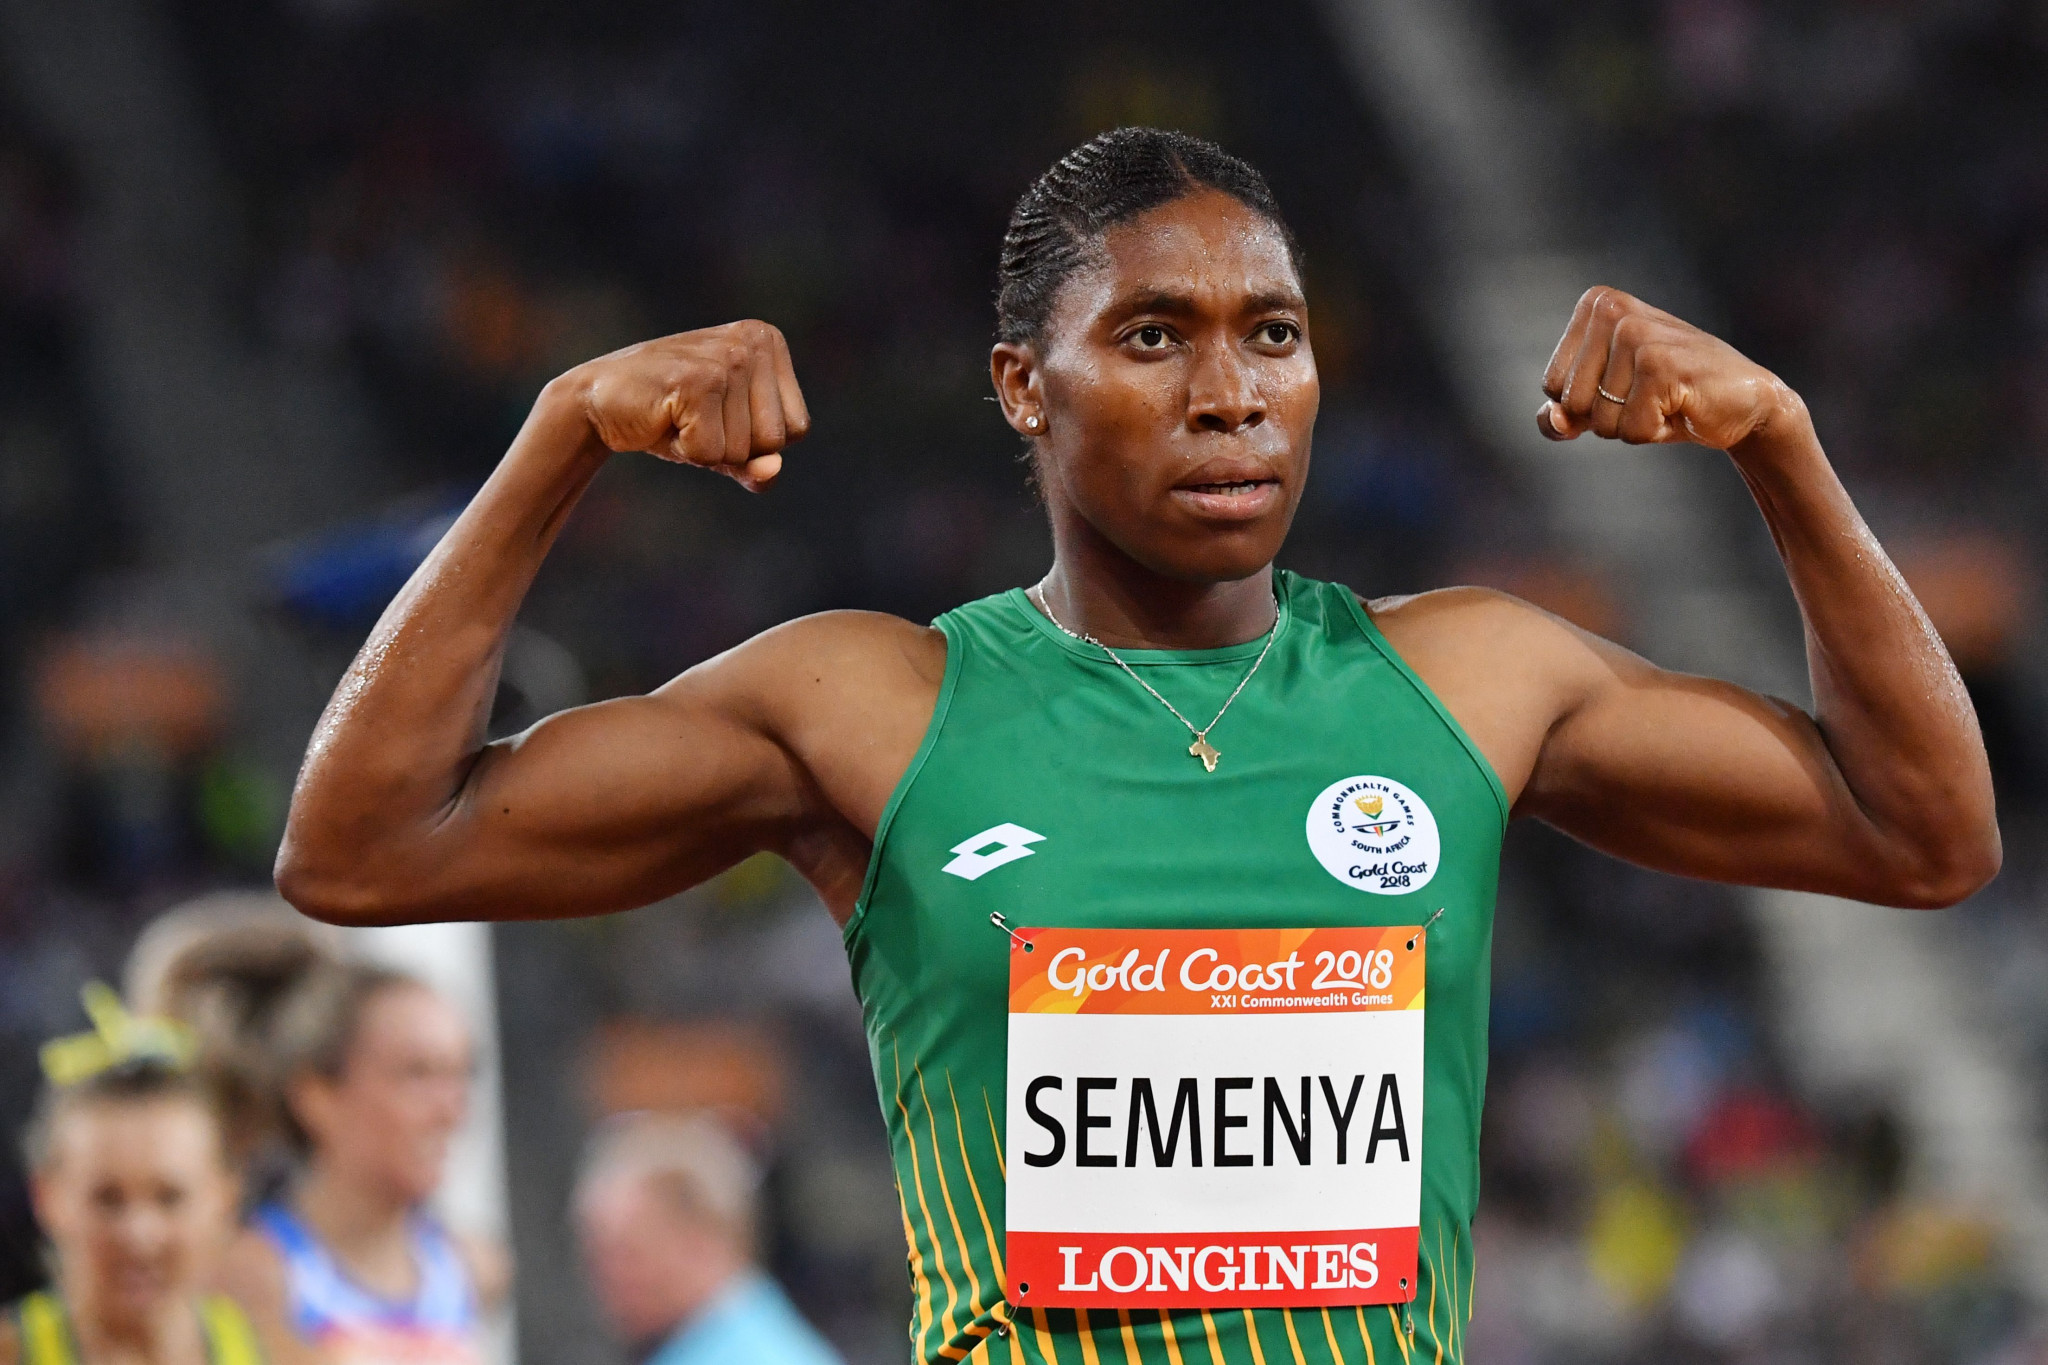 South Africa's Caster Semenya powered to victory in the women's 1,500m ©Getty Images